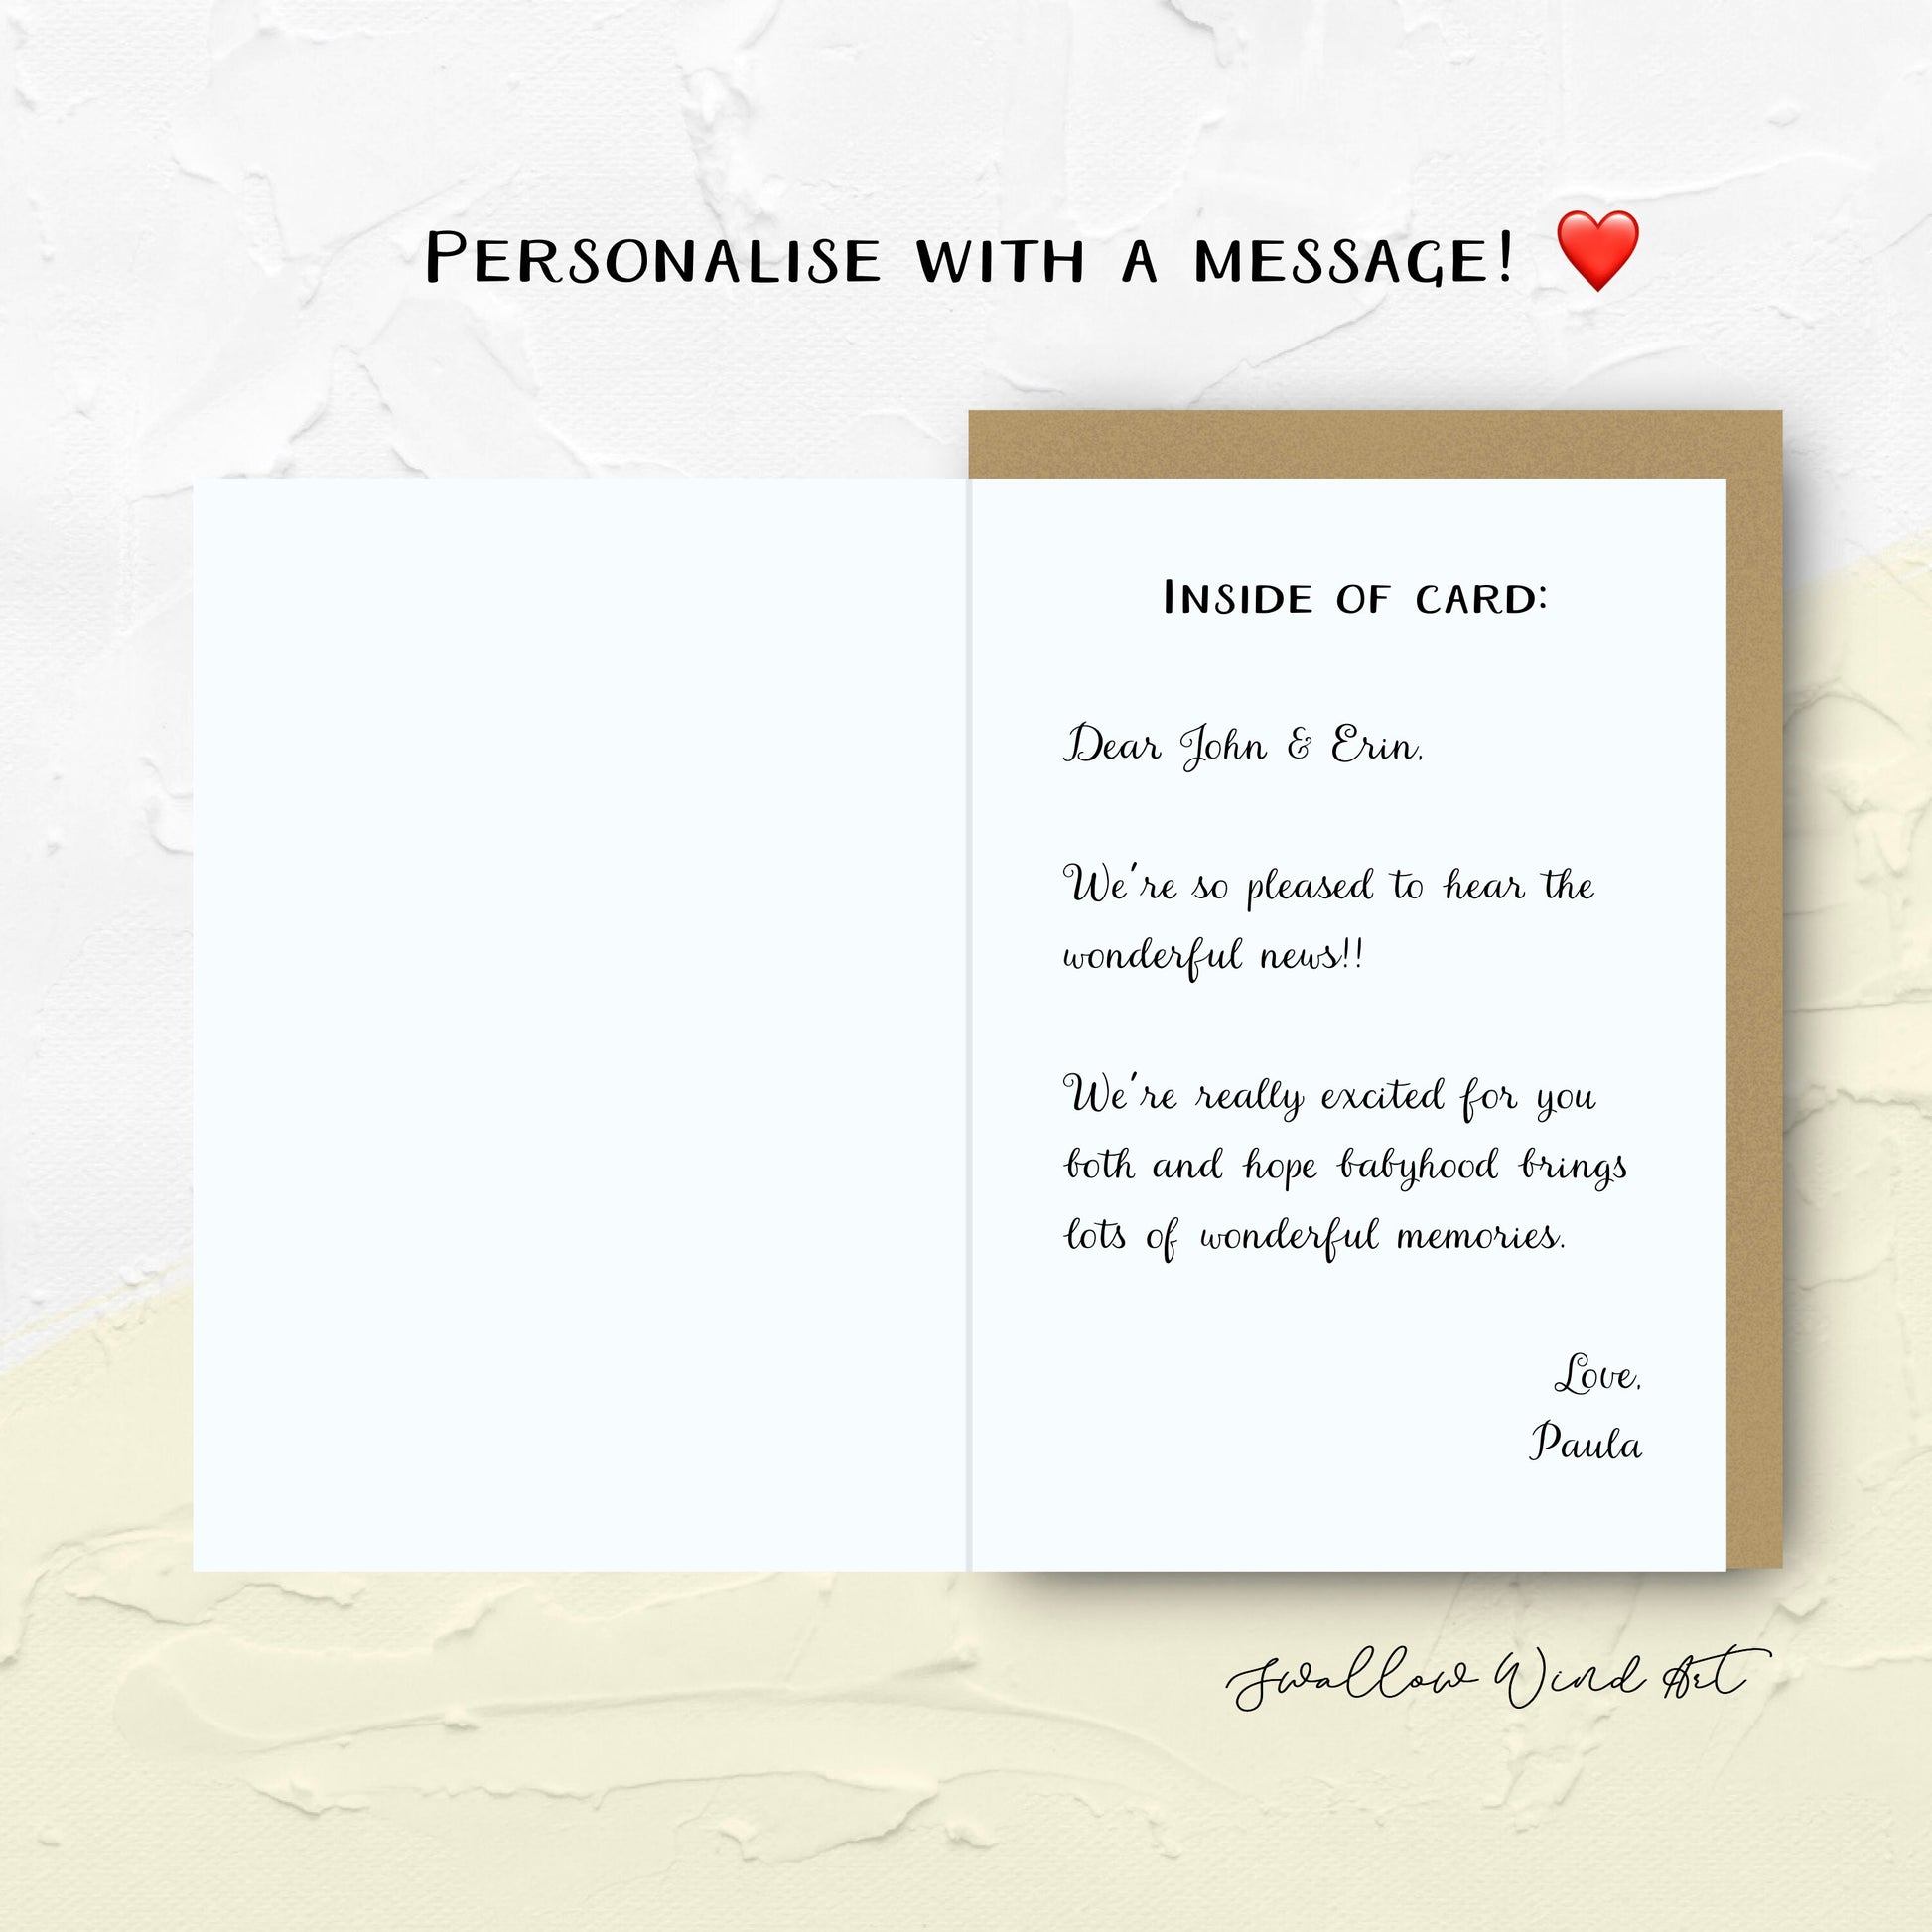 Inside of greeting card showing with option of adding a message in the card